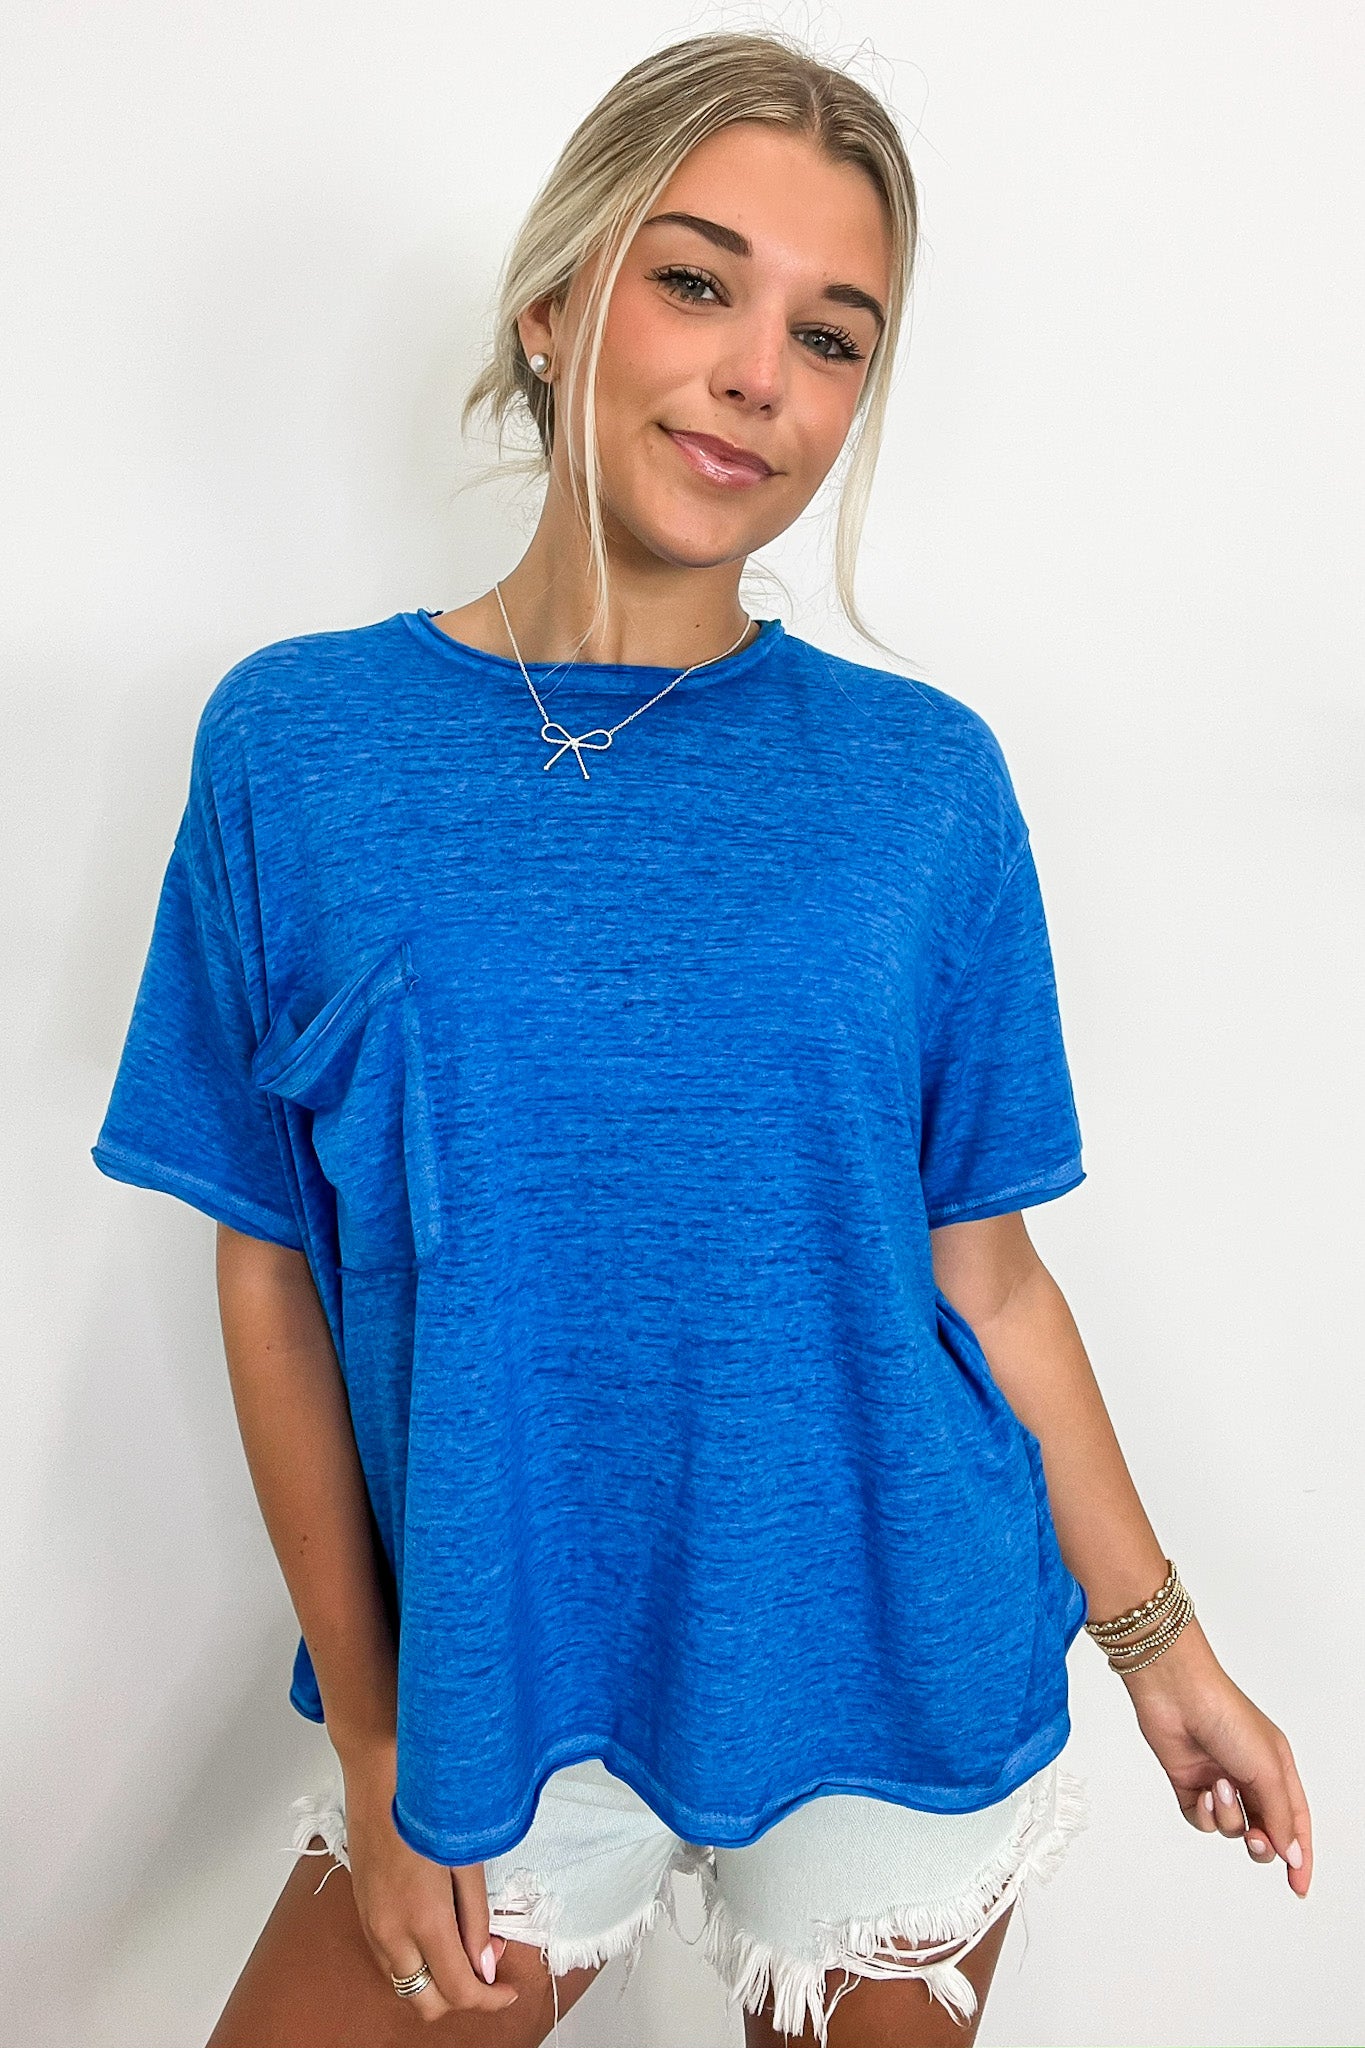 Ocean Blue / SM Marisol Burnout Wash Oversized Pocket Top - BACK IN STOCK - Madison and Mallory